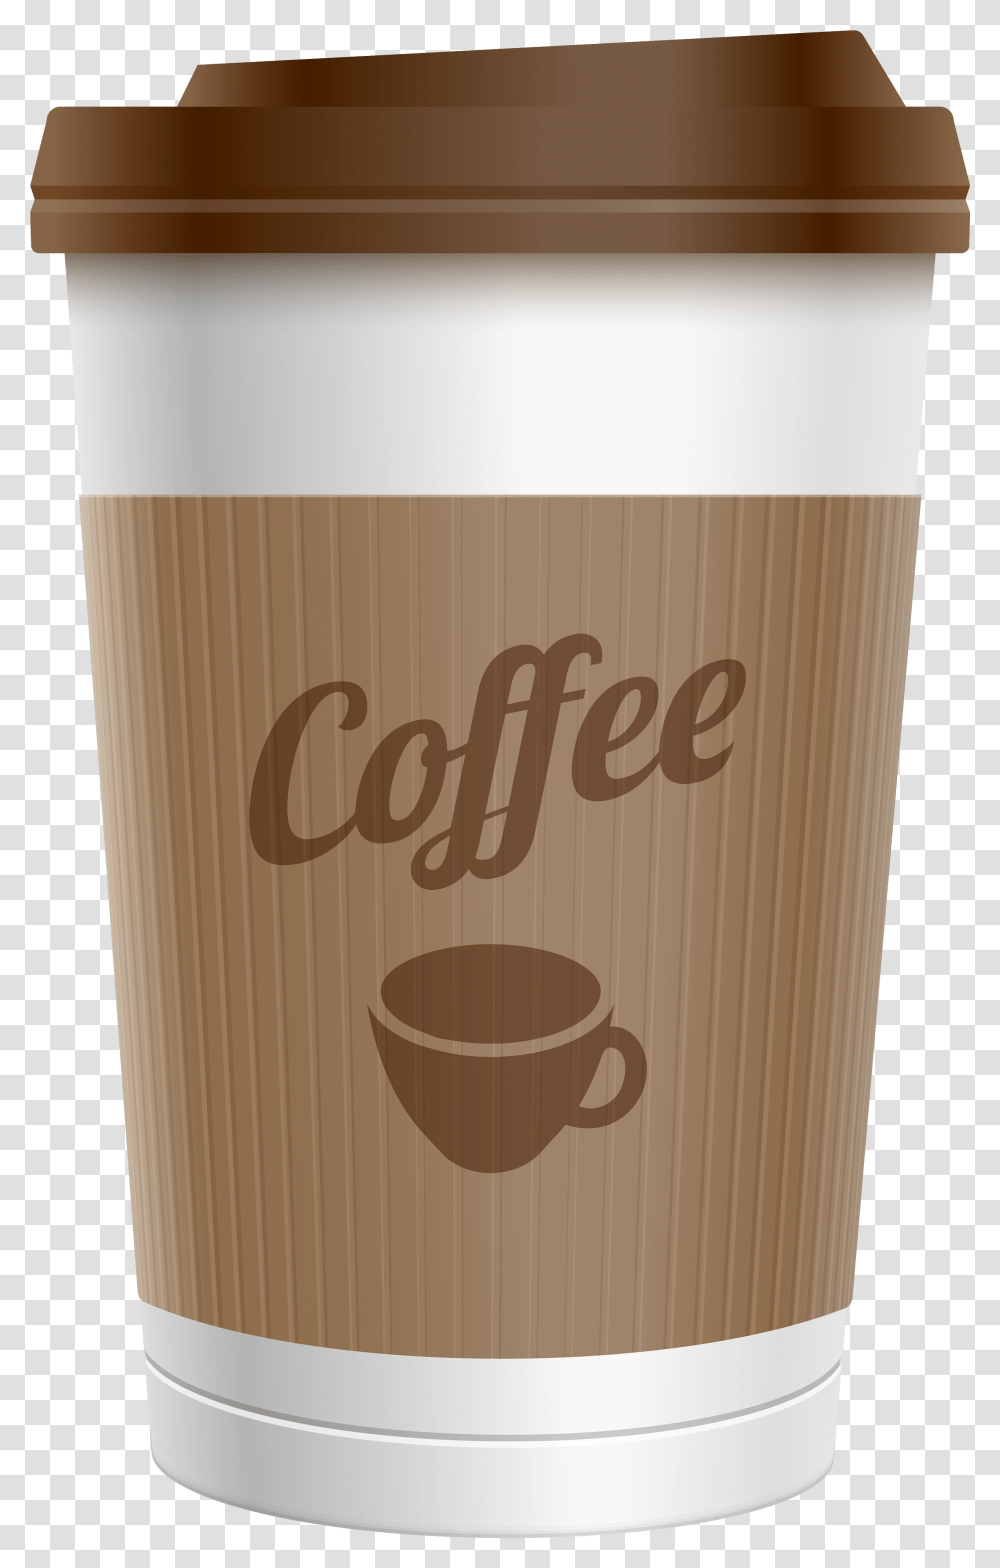 Plastic Coffee Cup Clipart Image Coffee Cup Background, Glass, Beer, Alcohol, Beverage Transparent Png